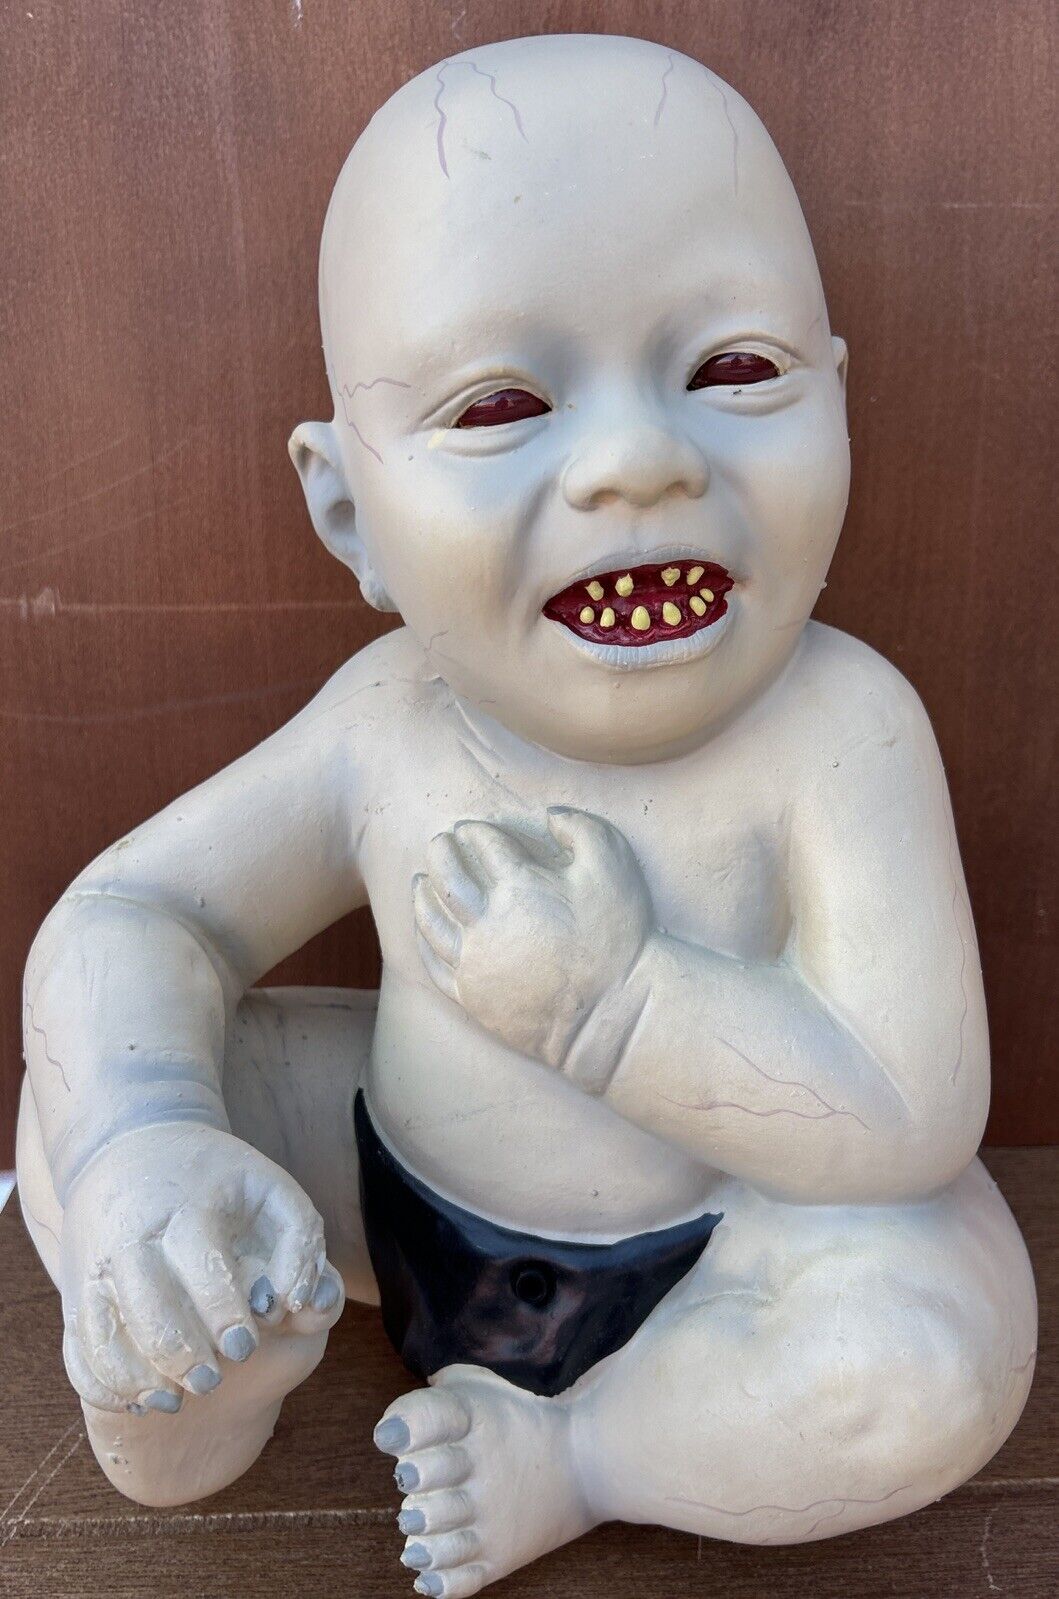 Spirit Halloween Zombie Baby The Runt 2011 15” Rubberized Doll